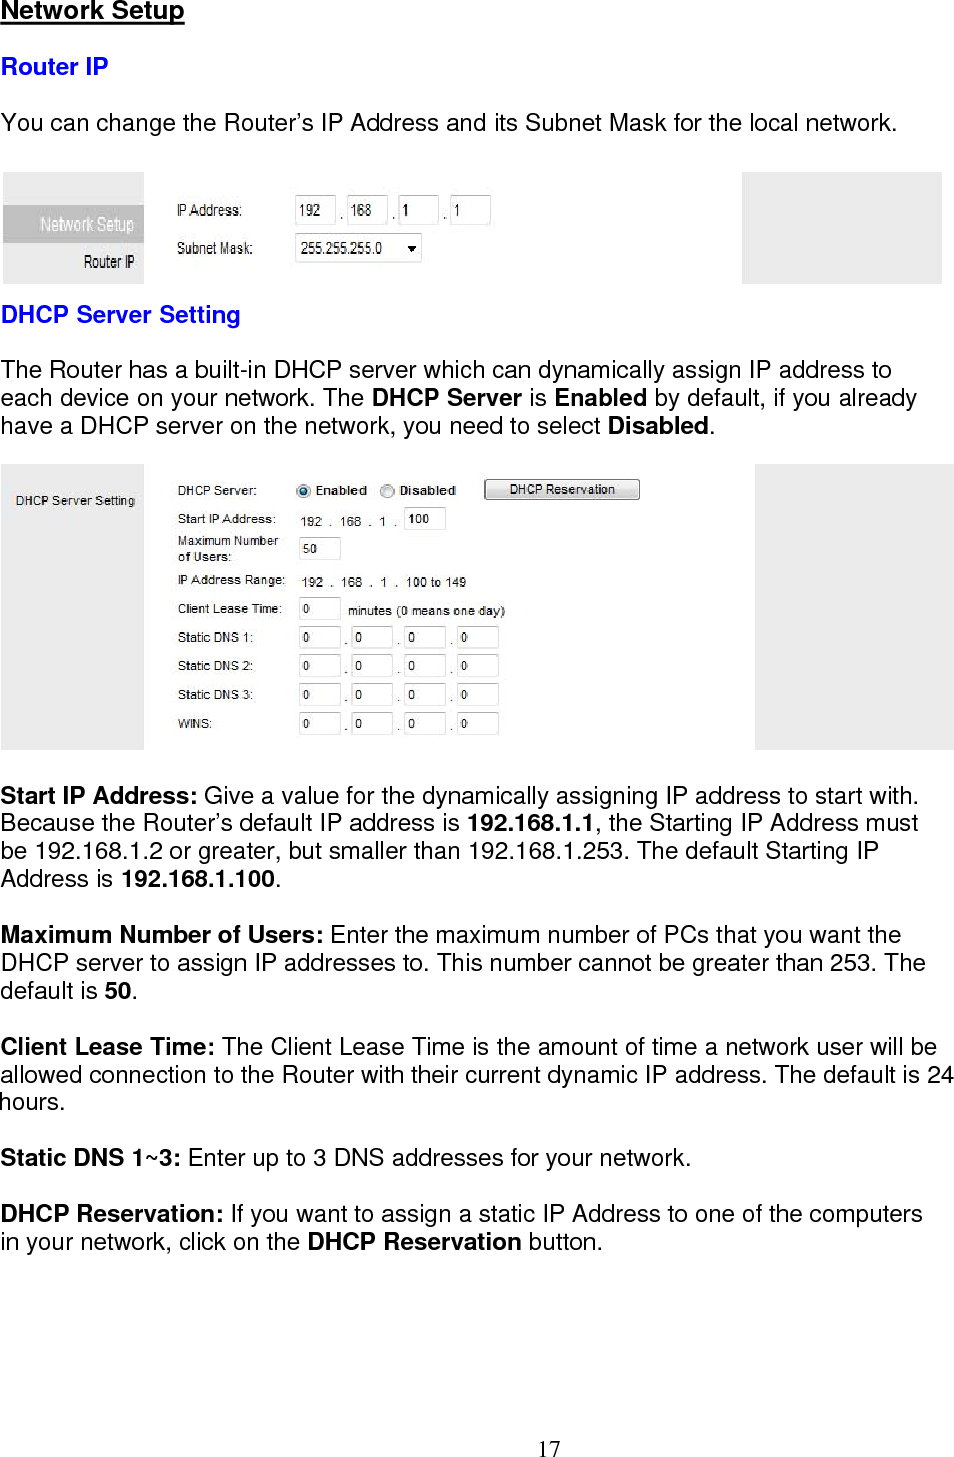  17Network Setup Router IP You can change the Router’s IP Address and its Subnet Mask for the local network.  DHCP Server Setting The Router has a built-in DHCP server which can dynamically assign IP address to  each device on your network. The DHCP Server is Enabled by default, if you already have a DHCP server on the network, you need to select Disabled.  Start IP Address: Give a value for the dynamically assigning IP address to start with. Because the Router’s default IP address is 192.168.1.1, the Starting IP Address must  be 192.168.1.2 or greater, but smaller than 192.168.1.253. The default Starting IP  Address is 192.168.1.100.  Maximum Number of Users: Enter the maximum number of PCs that you want the  DHCP server to assign IP addresses to. This number cannot be greater than 253. The default is 50.  Client Lease Time: The Client Lease Time is the amount of time a network user will be allowed connection to the Router with their current dynamic IP address. The default is 24 hours. Static DNS 1~3: Enter up to 3 DNS addresses for your network.  DHCP Reservation: If you want to assign a static IP Address to one of the computers in your network, click on the DHCP Reservation button.  